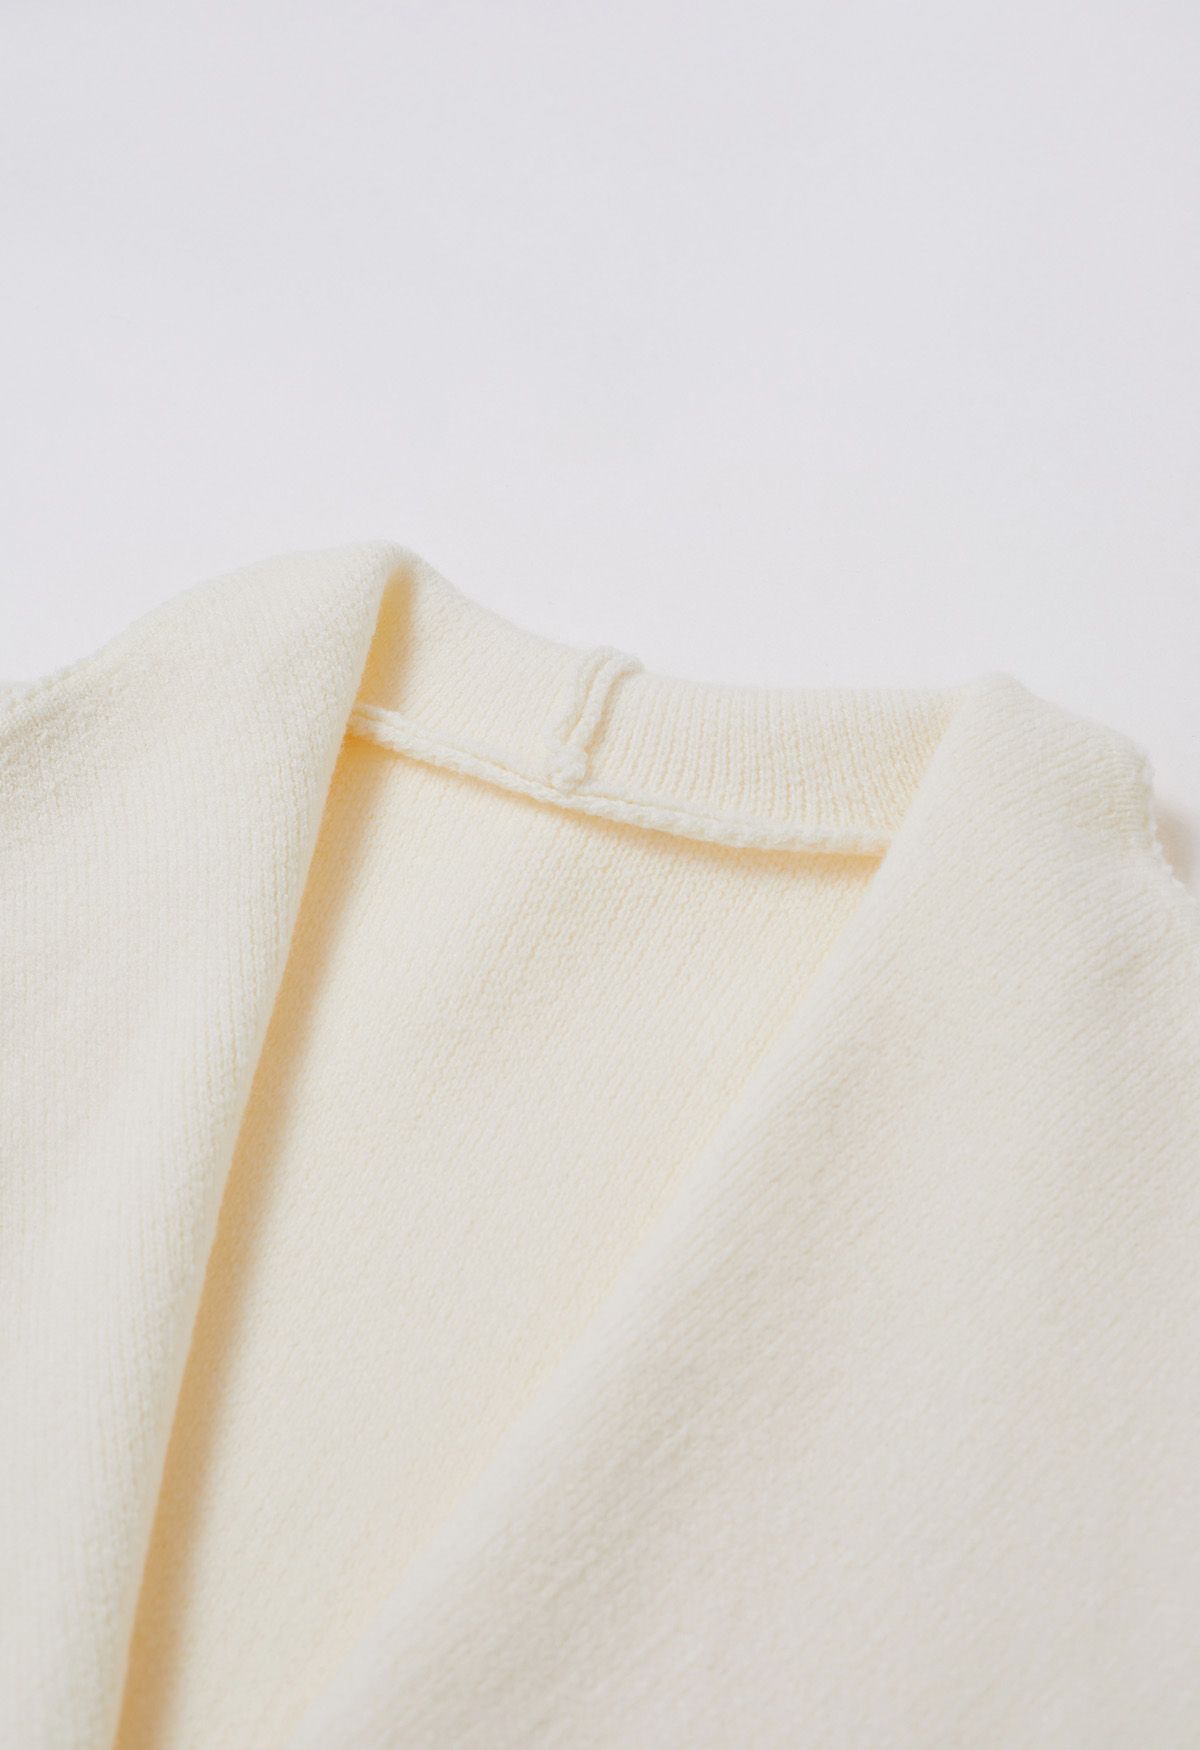 Casual-Chic Wide Lapel Knit Cardigan in Ivory